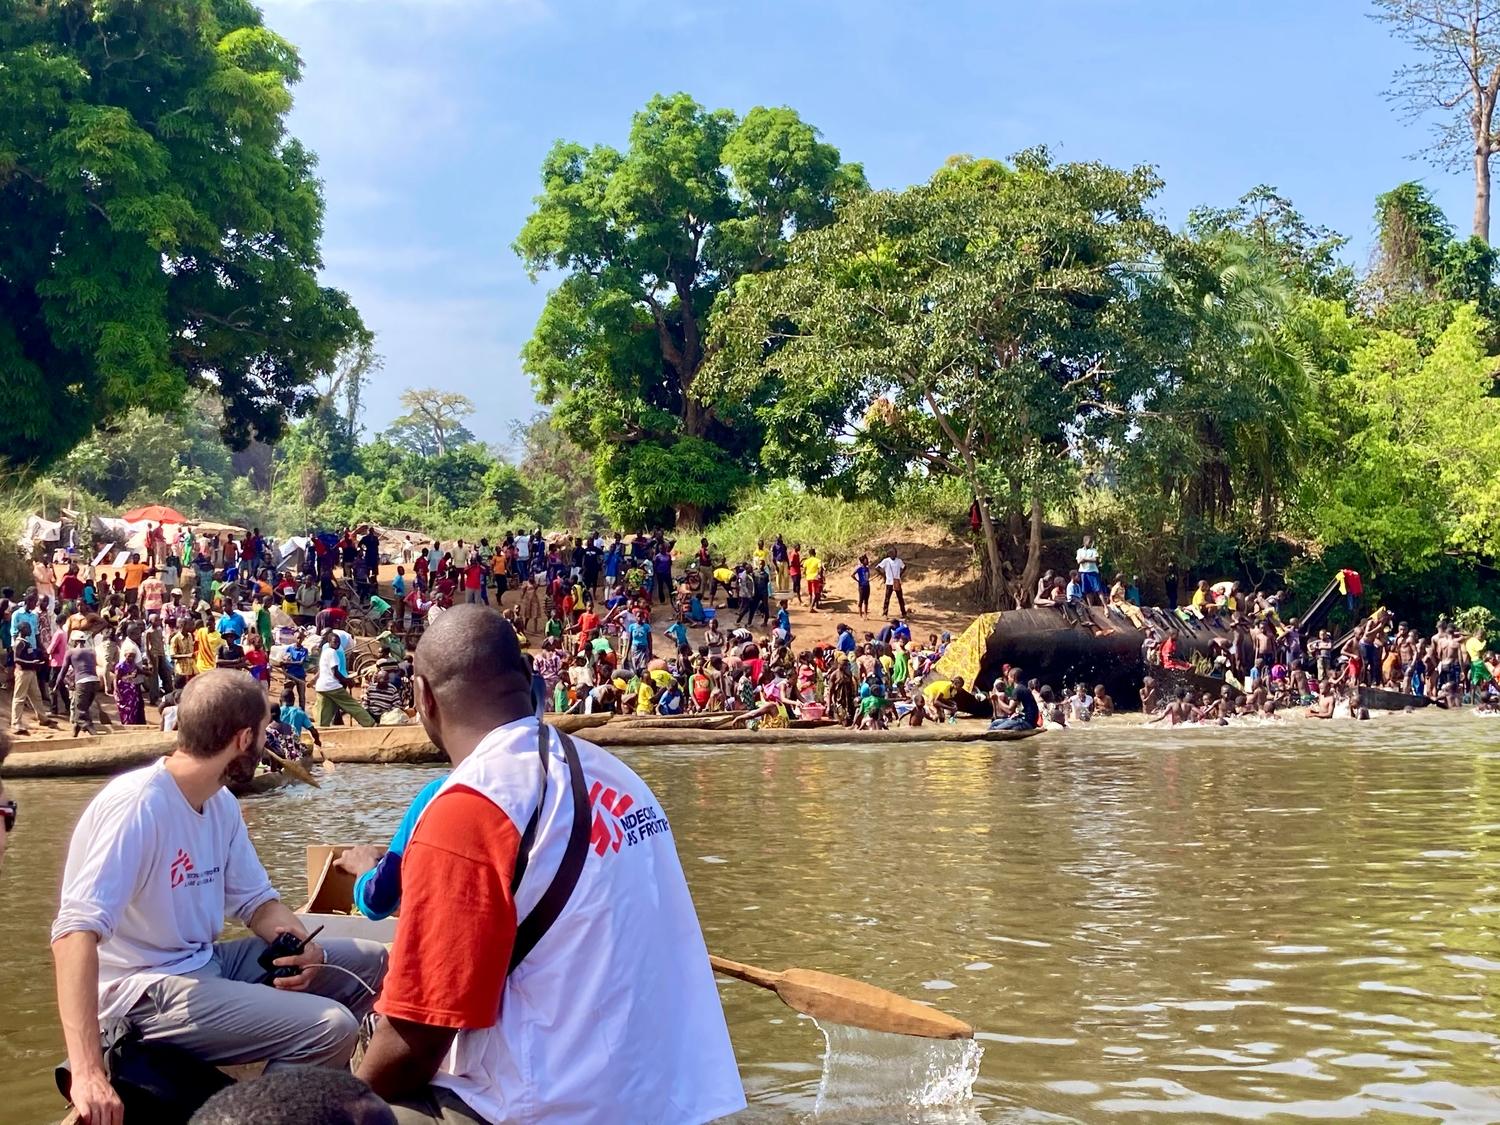 MSF staff are crossing the Mbomou river to reach Ndu, in DRC, where thousands of people from the Central African Republic sought refuge due to a non-state armed group attack on Bangassou on January 3rd. 